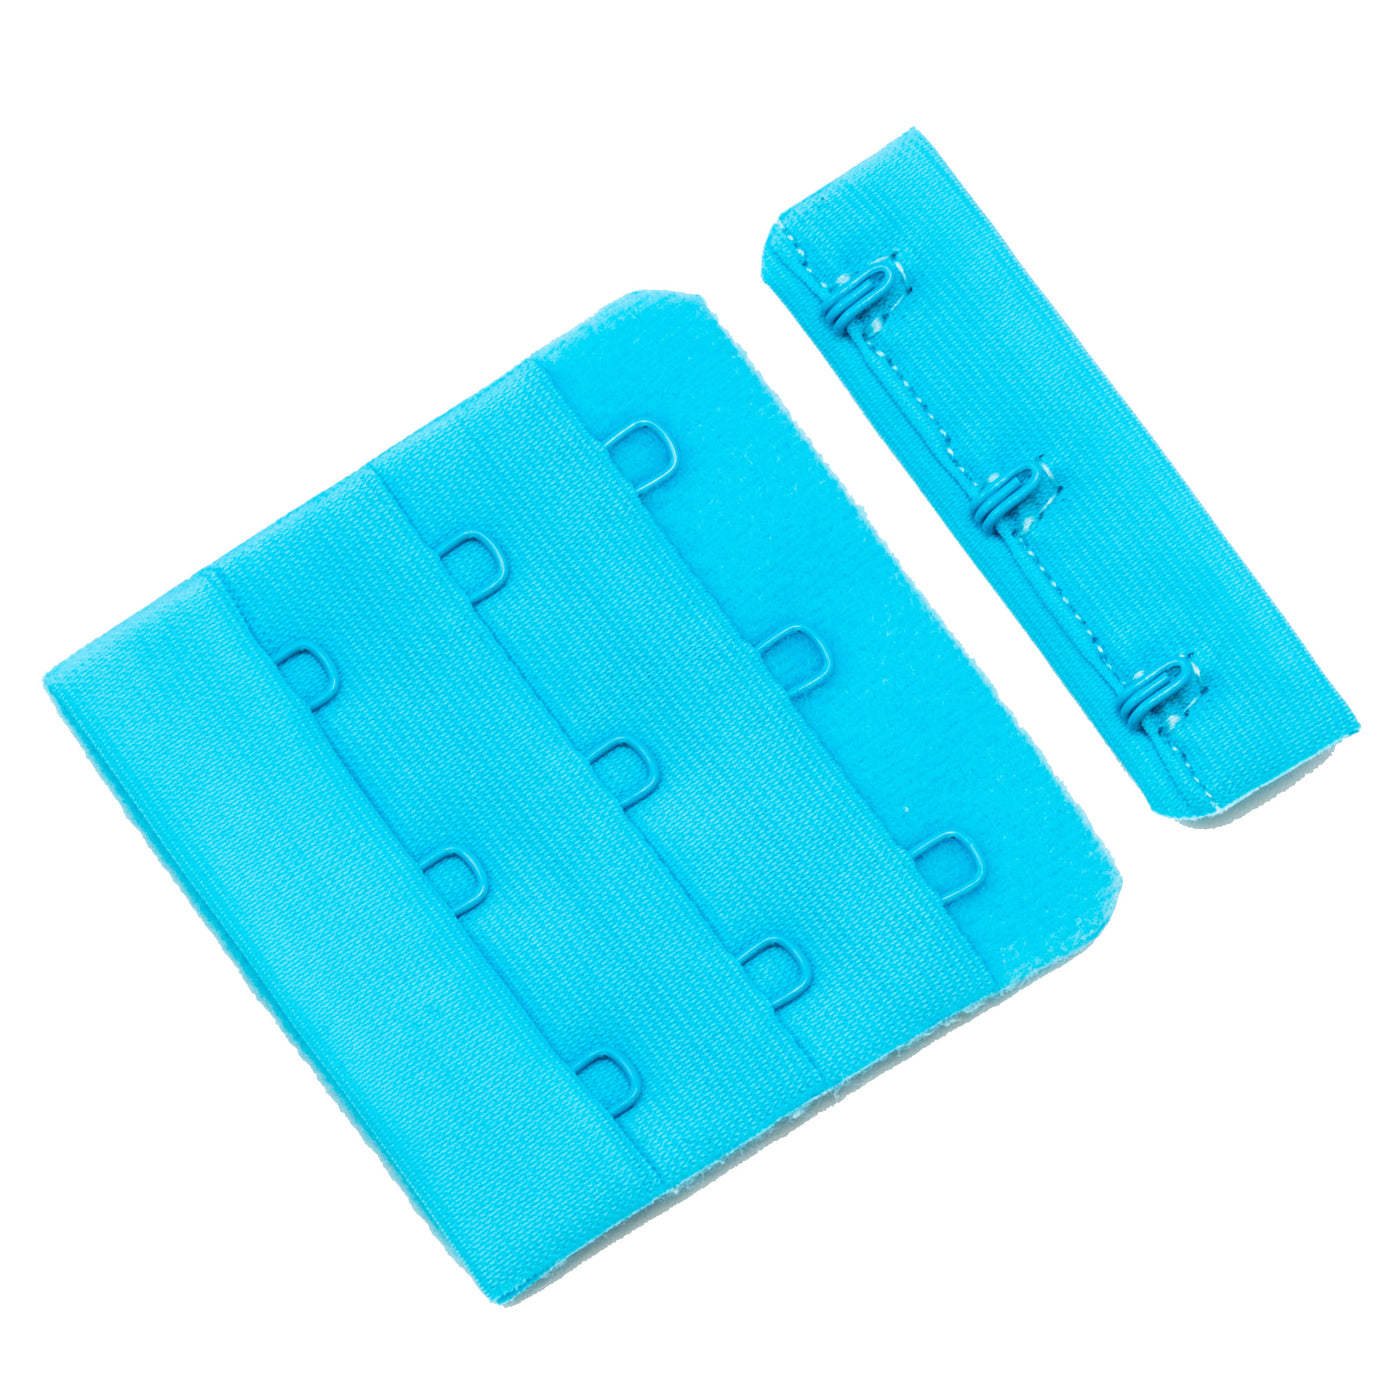 https://shop.wesewretro.com/cdn/shop/products/3x3-bra-hook-and-eye-turquoise-HS-33-or-3x3-hook-and-eye-back-closures-backelor-button-Pantone-14-4522-from-Bra-Makers-Supply-front-shown_1400x.jpg?v=1519000427